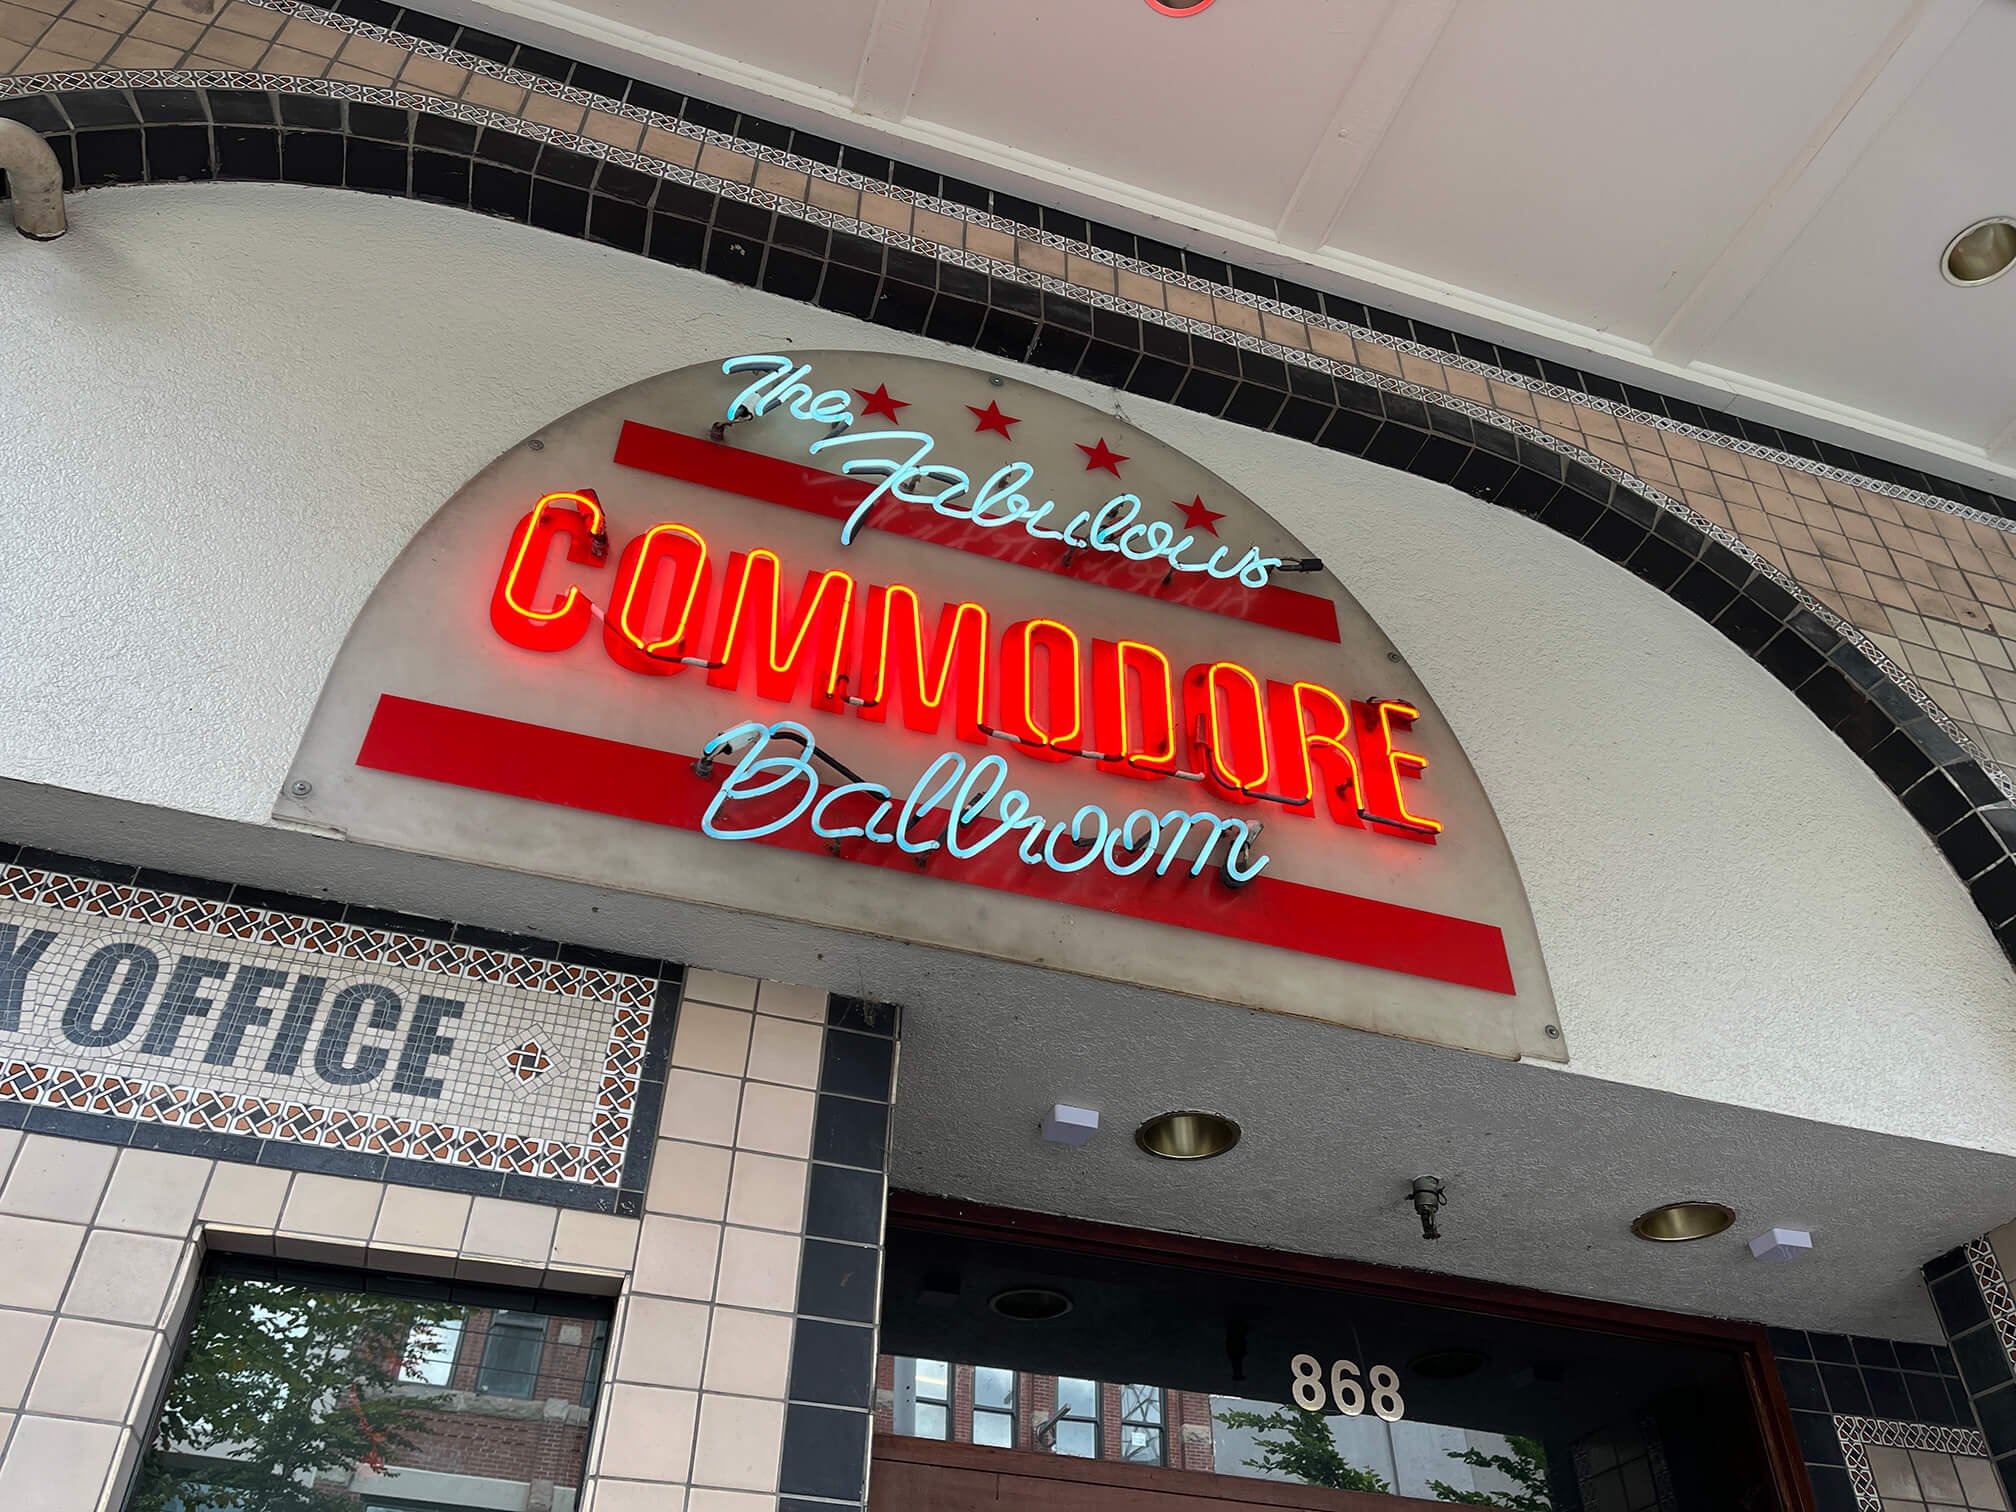 Close-up view of the neon sign above the Commodore Ballroom’s entrance doors.